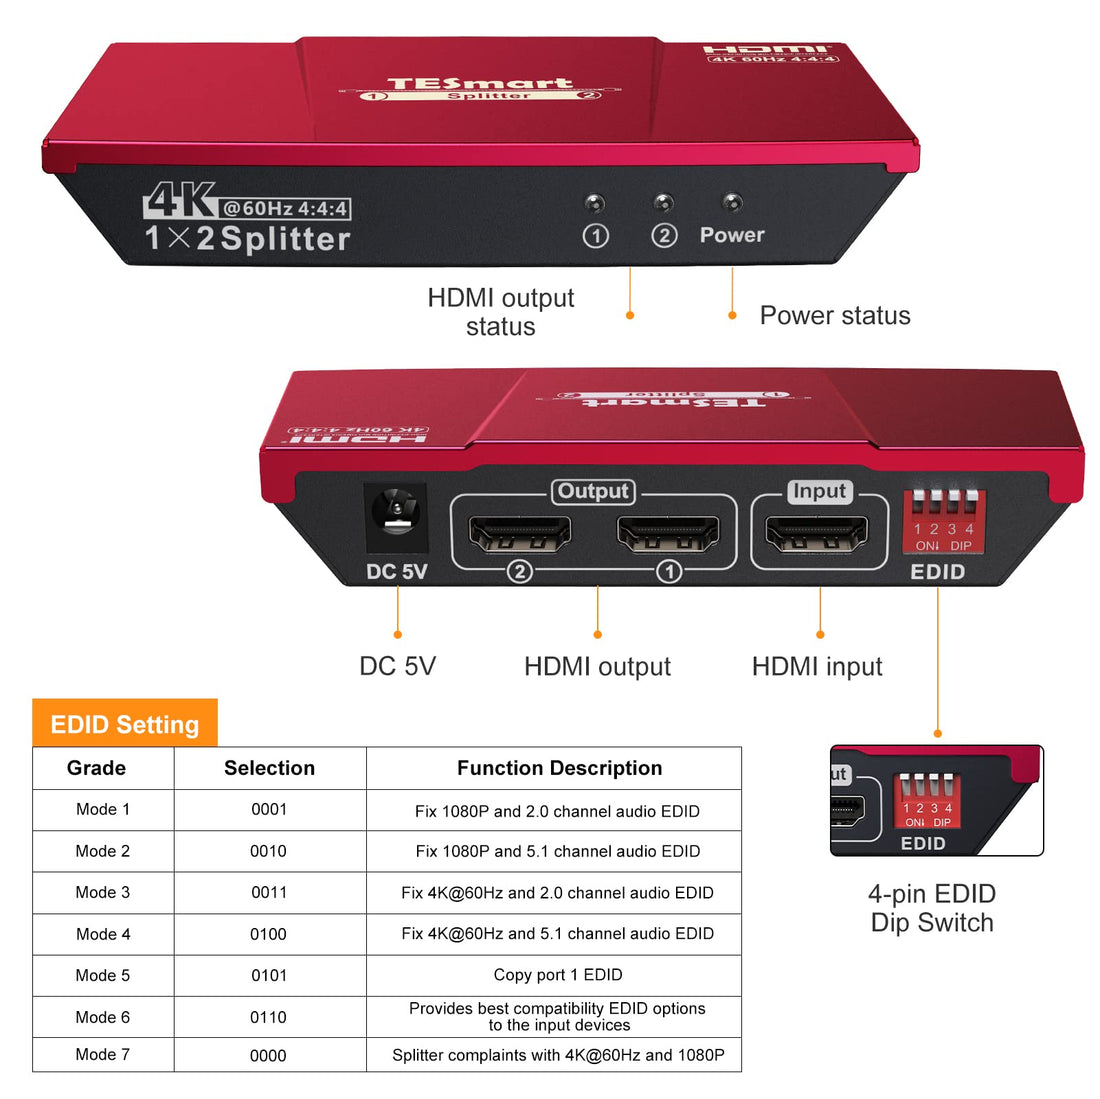 TESmart HDMI Splitter TESmart HDMI Splitter 1 in 2 Out, HDMI Splitter 4K @ 60Hz Supports HDCP 2.2 and CEC Function, Bi-Directional HDMI Splitter Flexible Control 7 EDID Modes Compatible with Laptop PS4 Xbox Sky Box Red